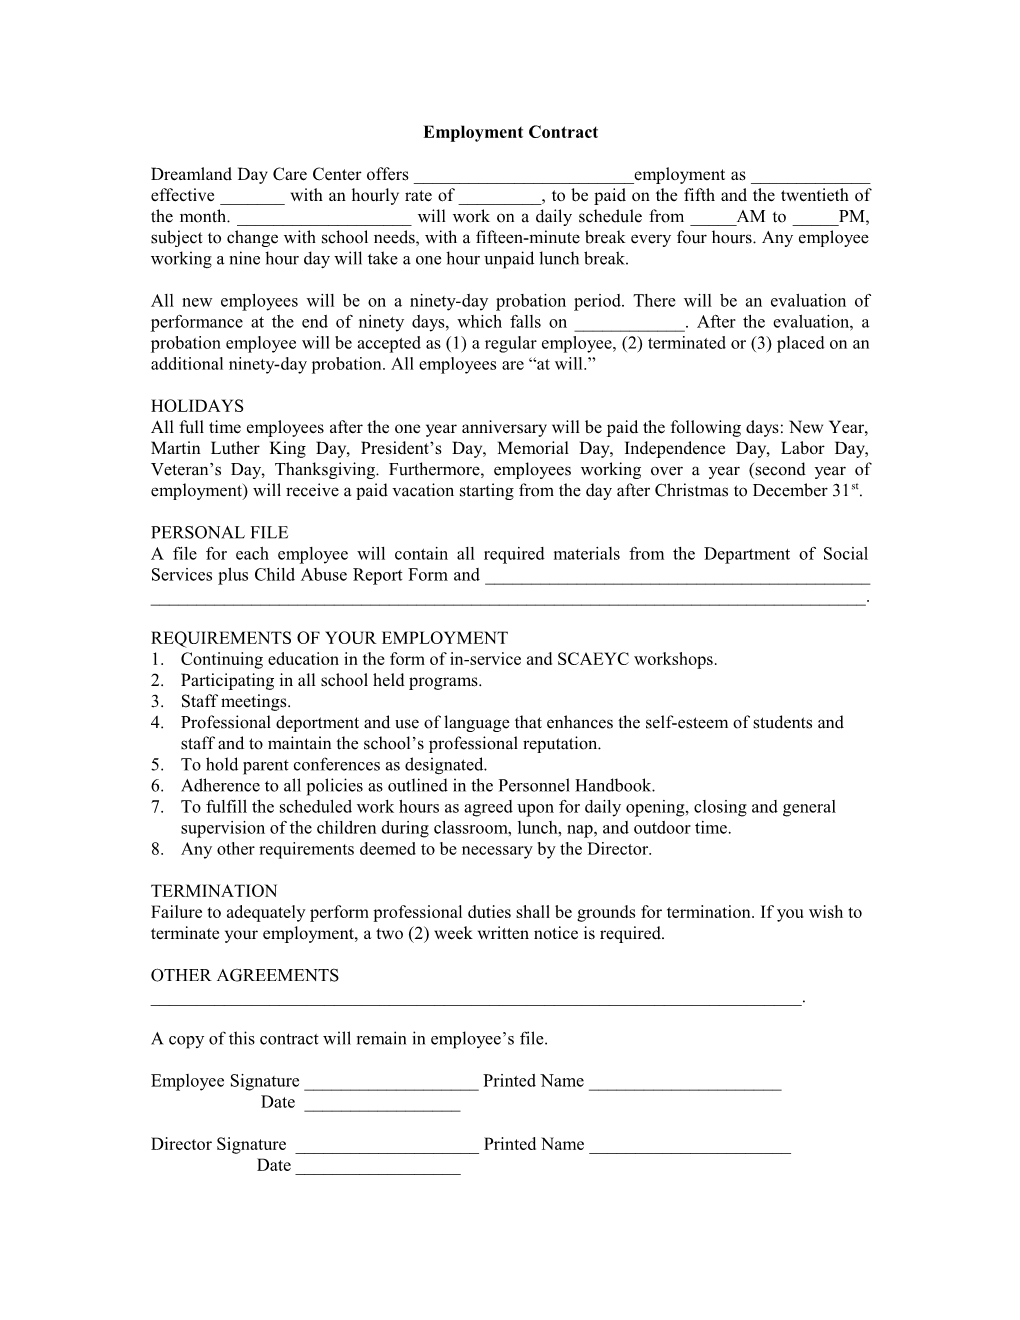 Employment Contract s1